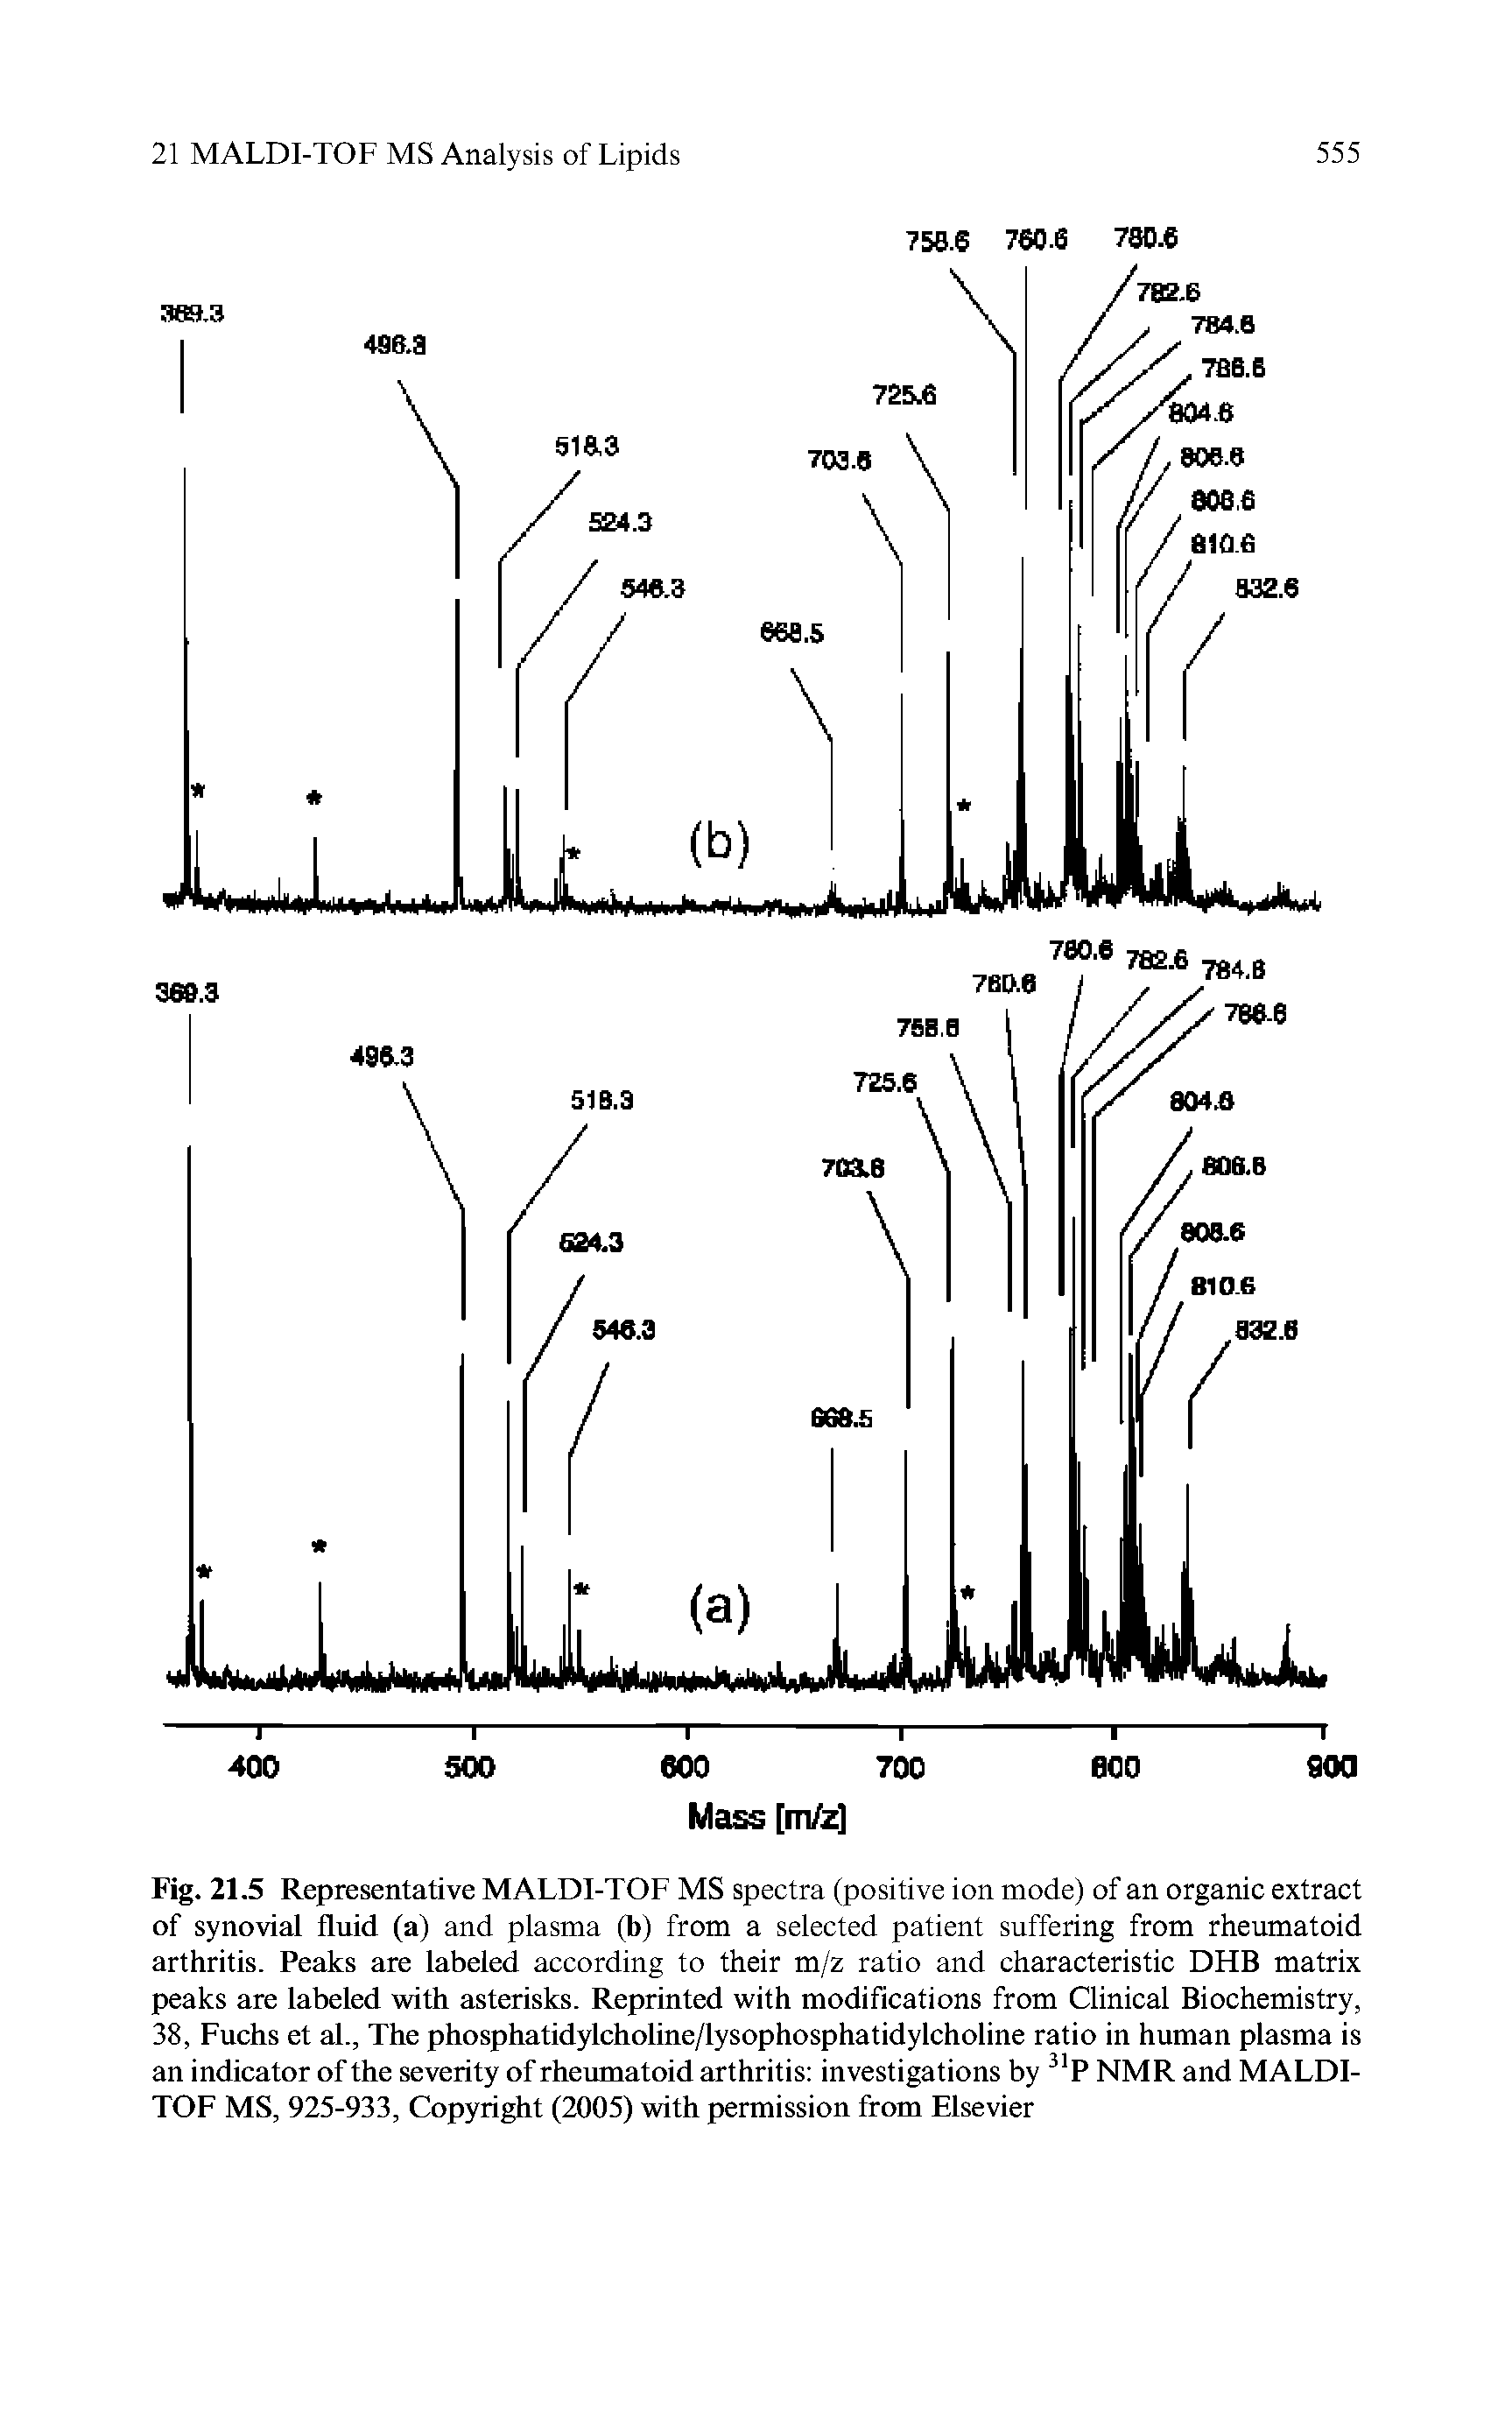 Fig. 21.5 Representative MALDI-TOF MS spectra (positive ion mode) of an organic extract of synovial fluid (a) and plasma (b) from a selected patient suffering from rheumatoid arthritis. Peaks are labeled according to their m/z ratio and characteristic DHB matrix peaks are labeled with asterisks. Reprinted with modifications from Clinical Biochemistry, 38, Fuchs et al.. The phosphatidylcholine/lysophosphatidylcholine ratio in human plasma is an indicator of the severity of rheumatoid arthritis investigations by P NMR and MALDI-TOF MS, 925-933, Copyright (2005) with permission from Elsevier...